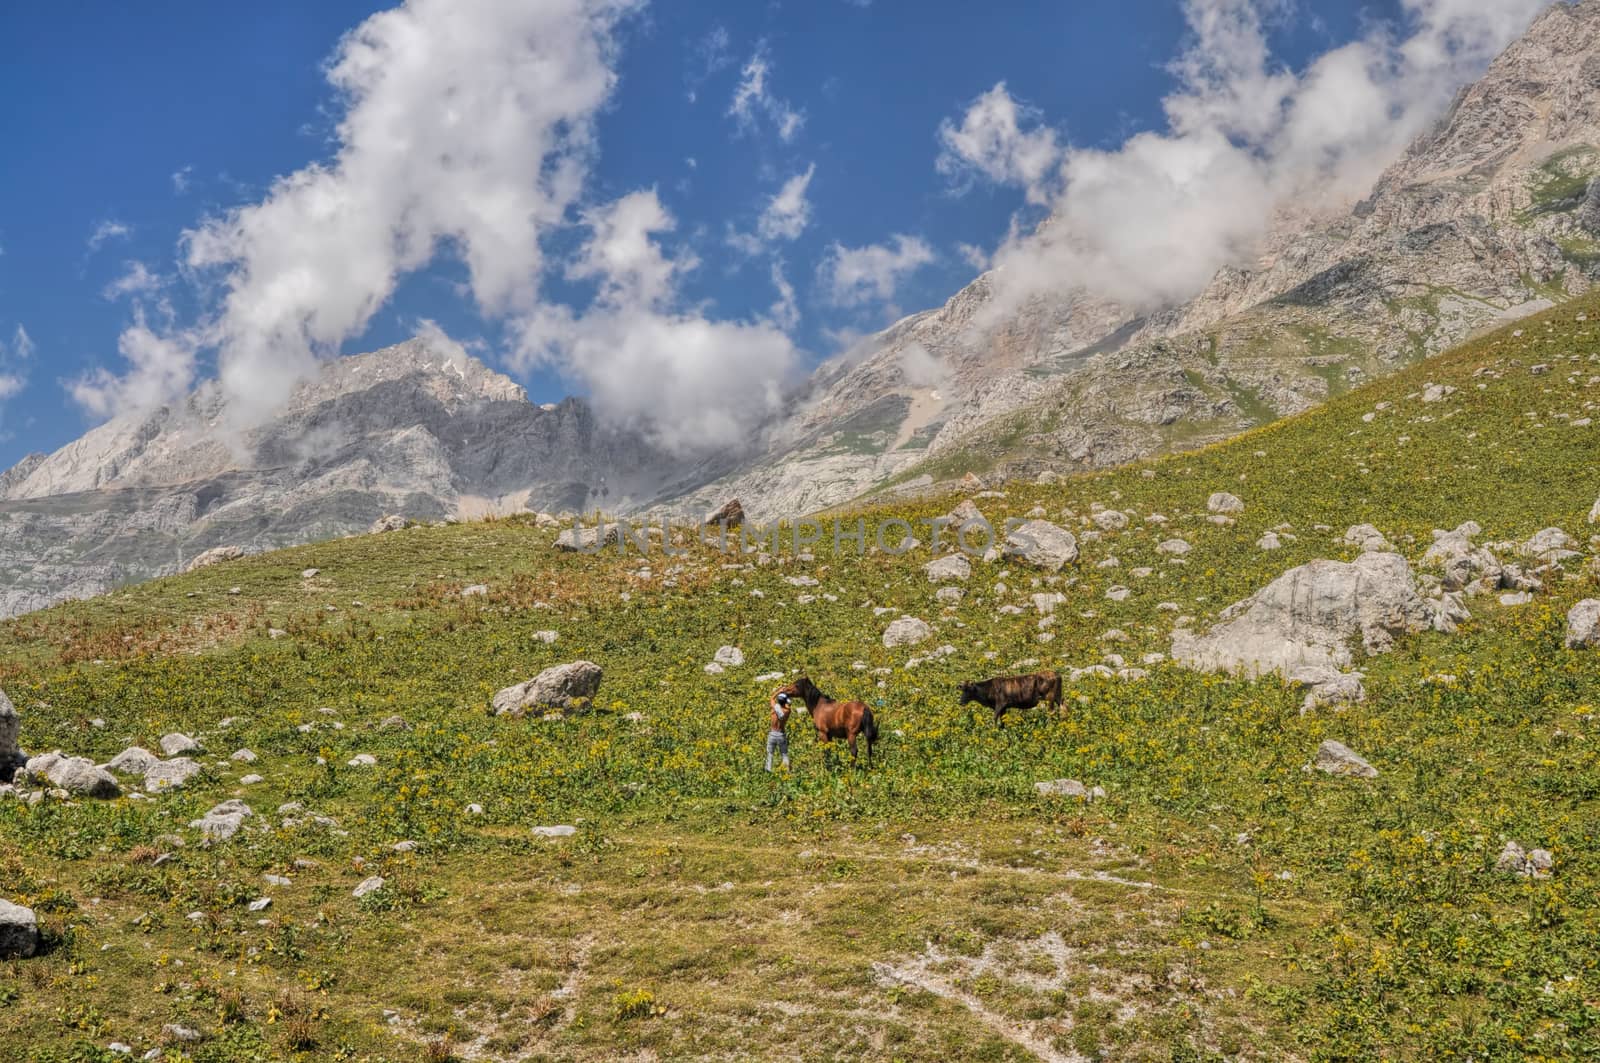 Shepherd with horse and bull in scenic mountain range in Kyrgyzstan